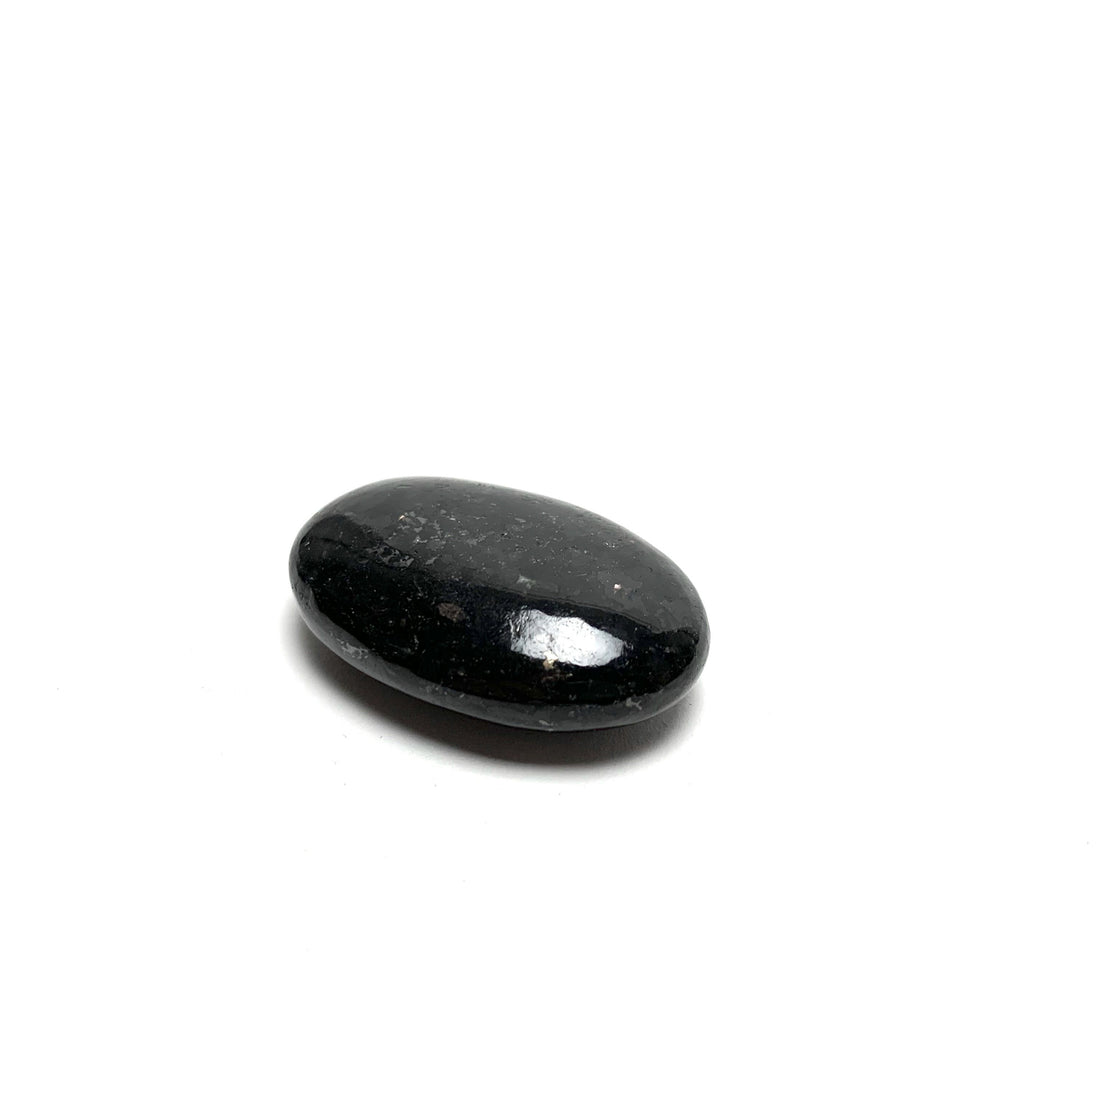 Nuummite Pillow Stone Nuumite Crystals A. $8.00 